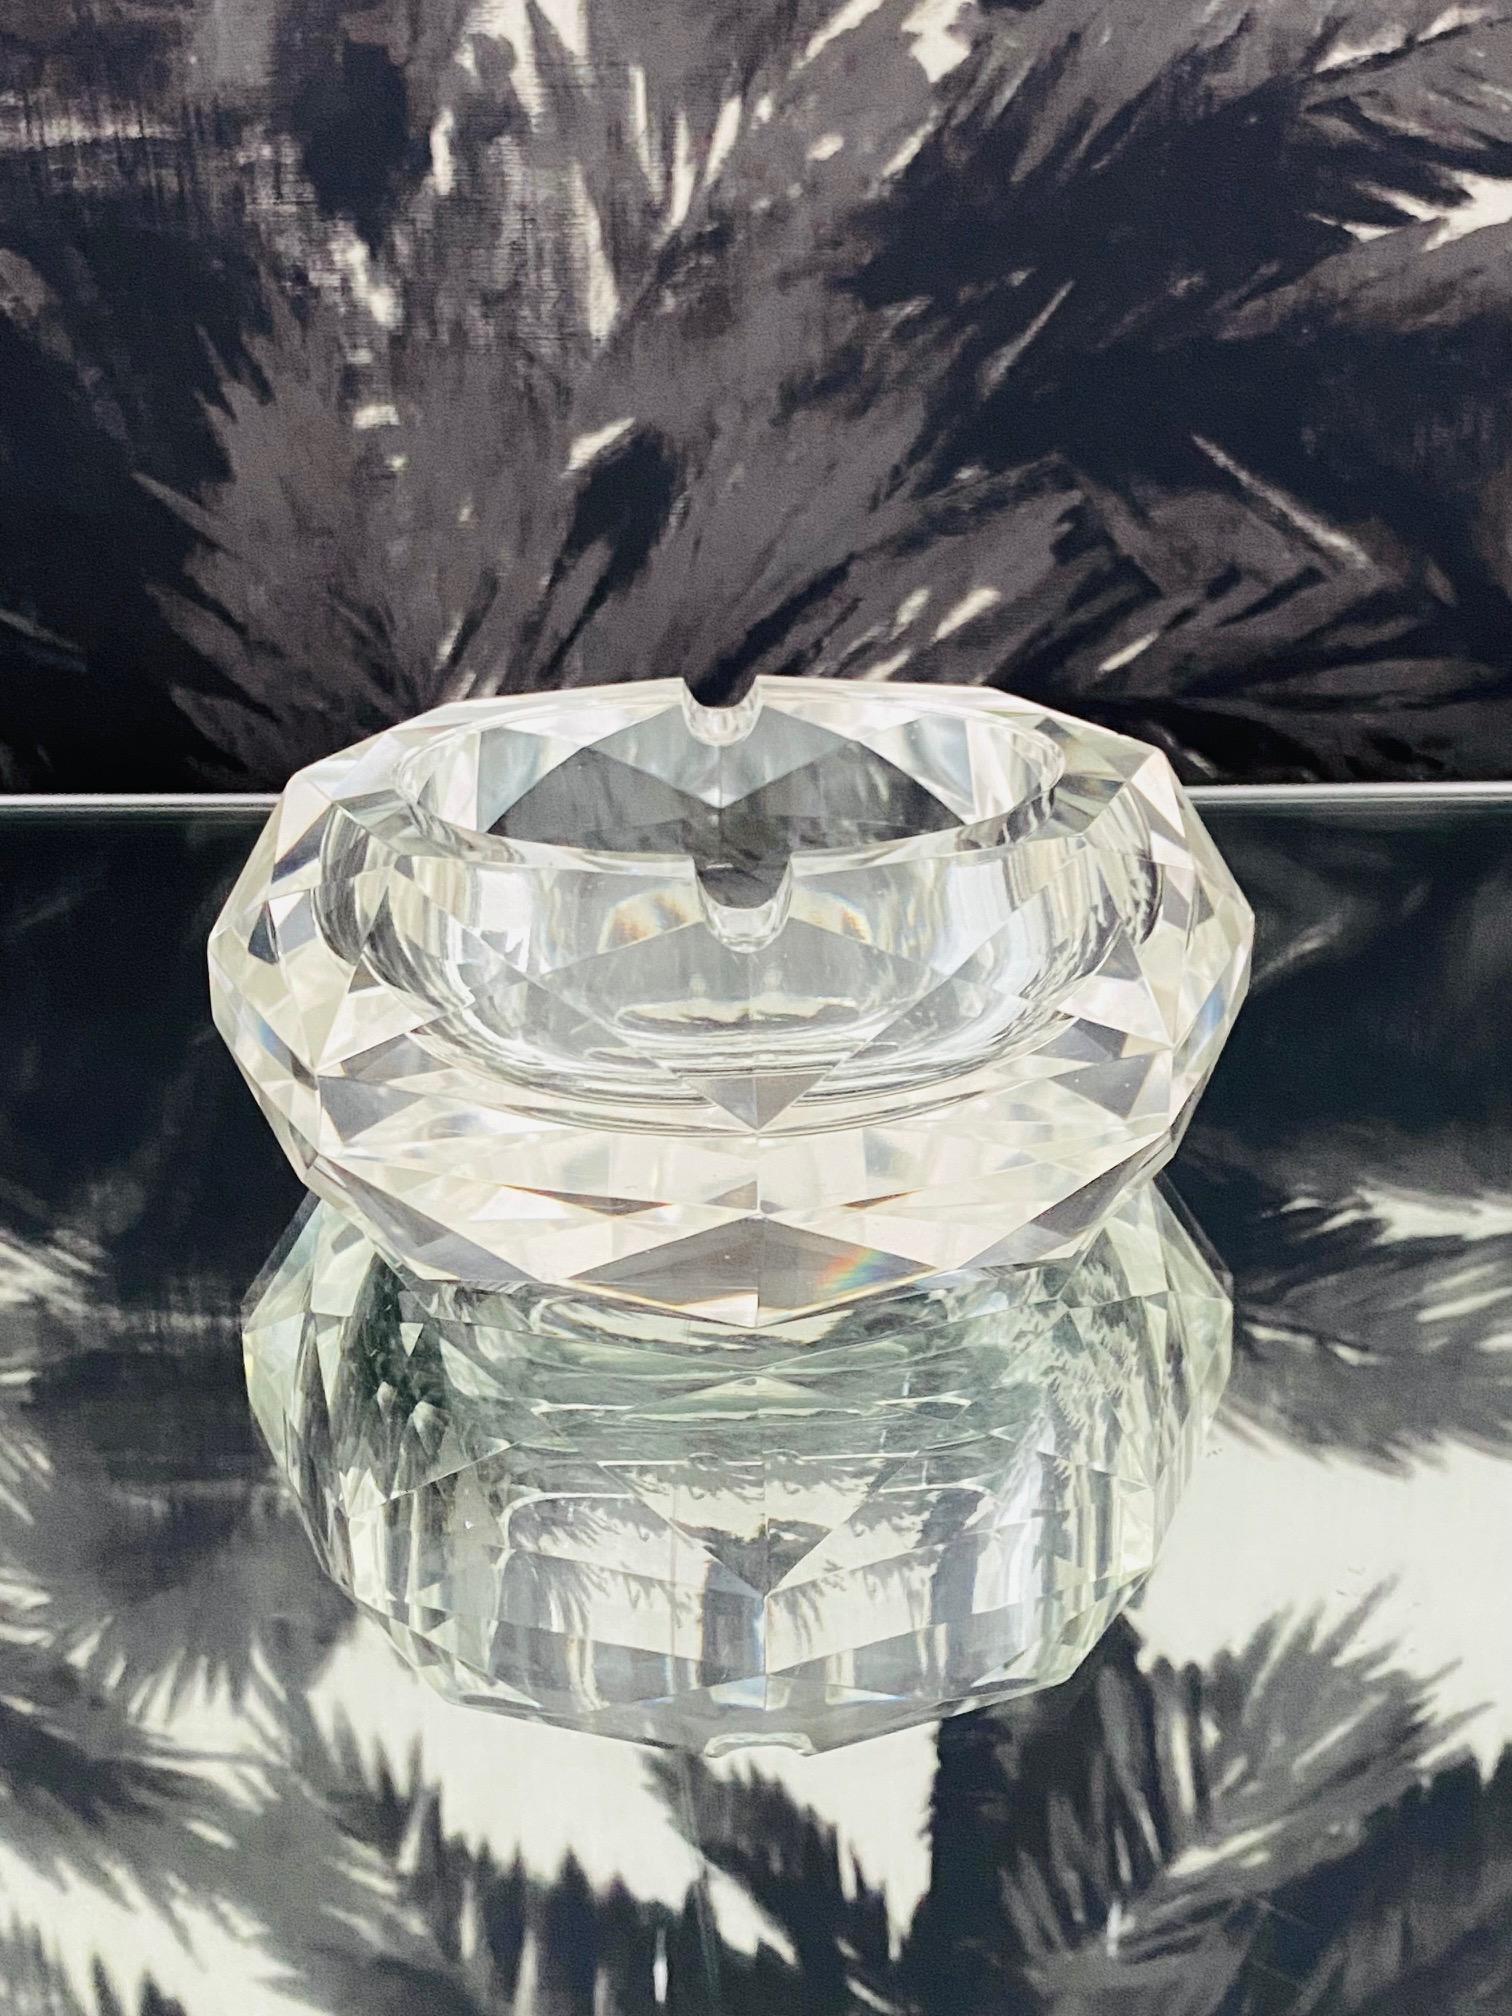 Mid-Century Modern Italian Murano Prism Glass Ashtray with Faceted Design, c. 1960's